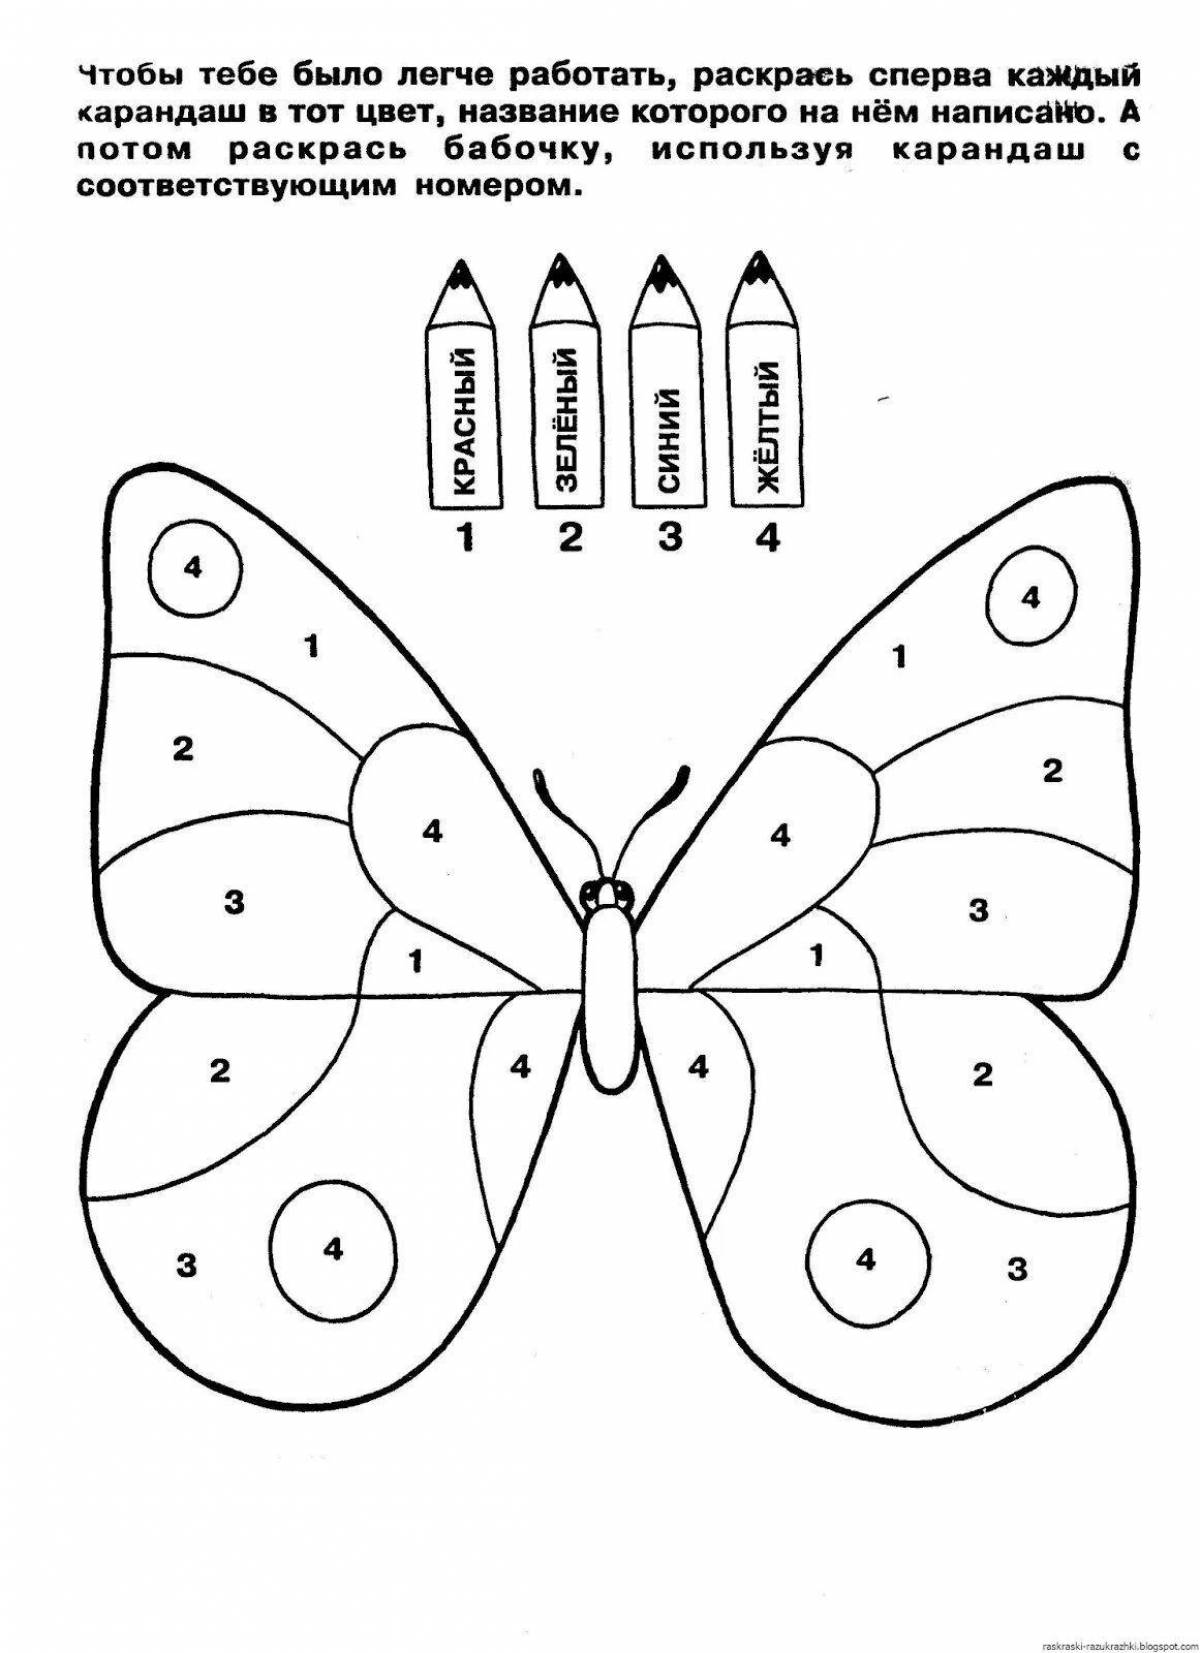 A fun math coloring book for 4-5 year olds